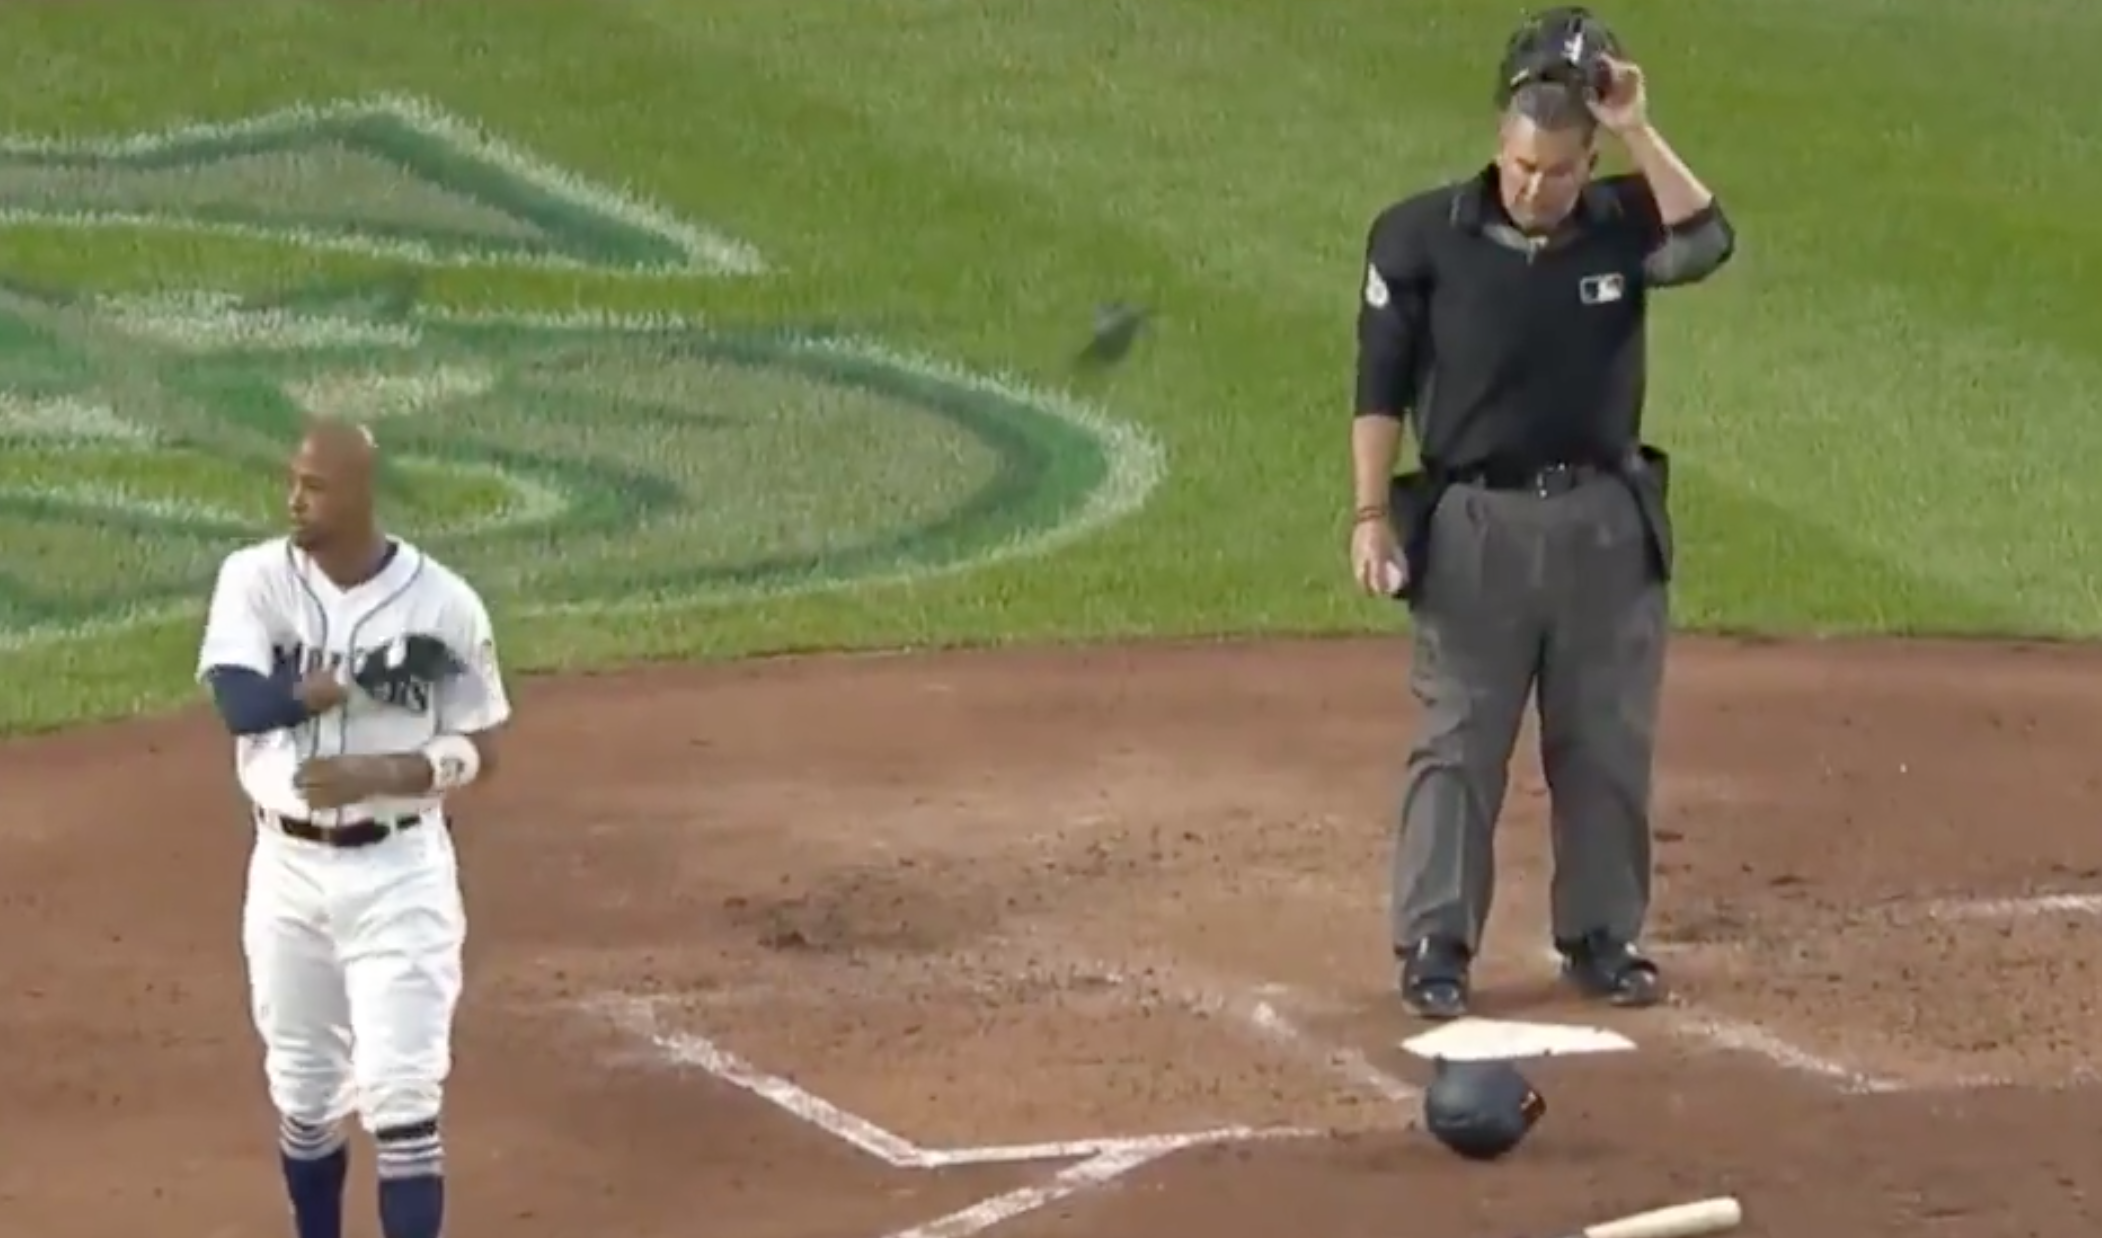 Burleson laments atbat altered by ump's call